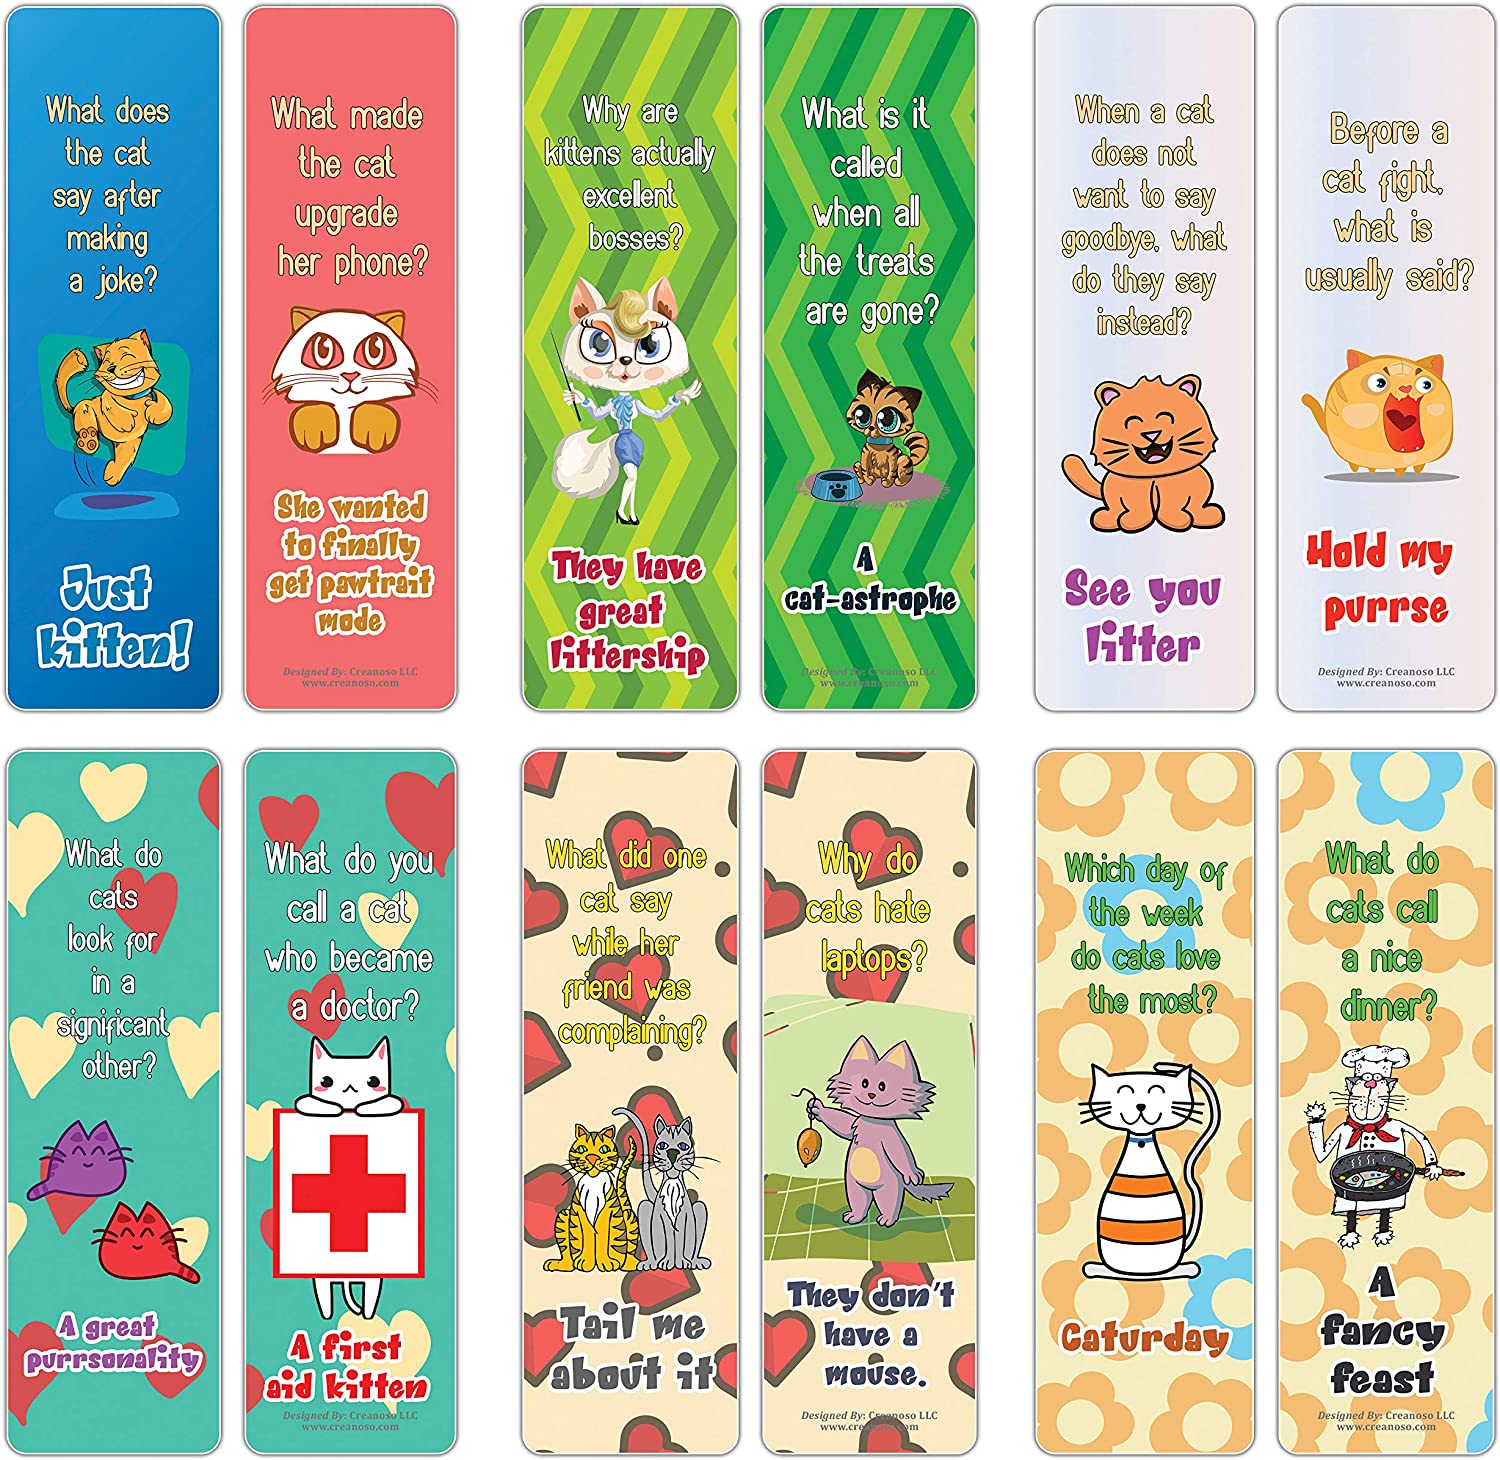 Creanoso Funny Cat Jokes Series 2 Bookmarks (30-Pack) â€“ Awesome Bookmarks for Bookworm, Bibliophiles â€“ Unique Book Reading Page Binders â€“ Stocking Stuffers Gifts Token Ideas for Cat Owners